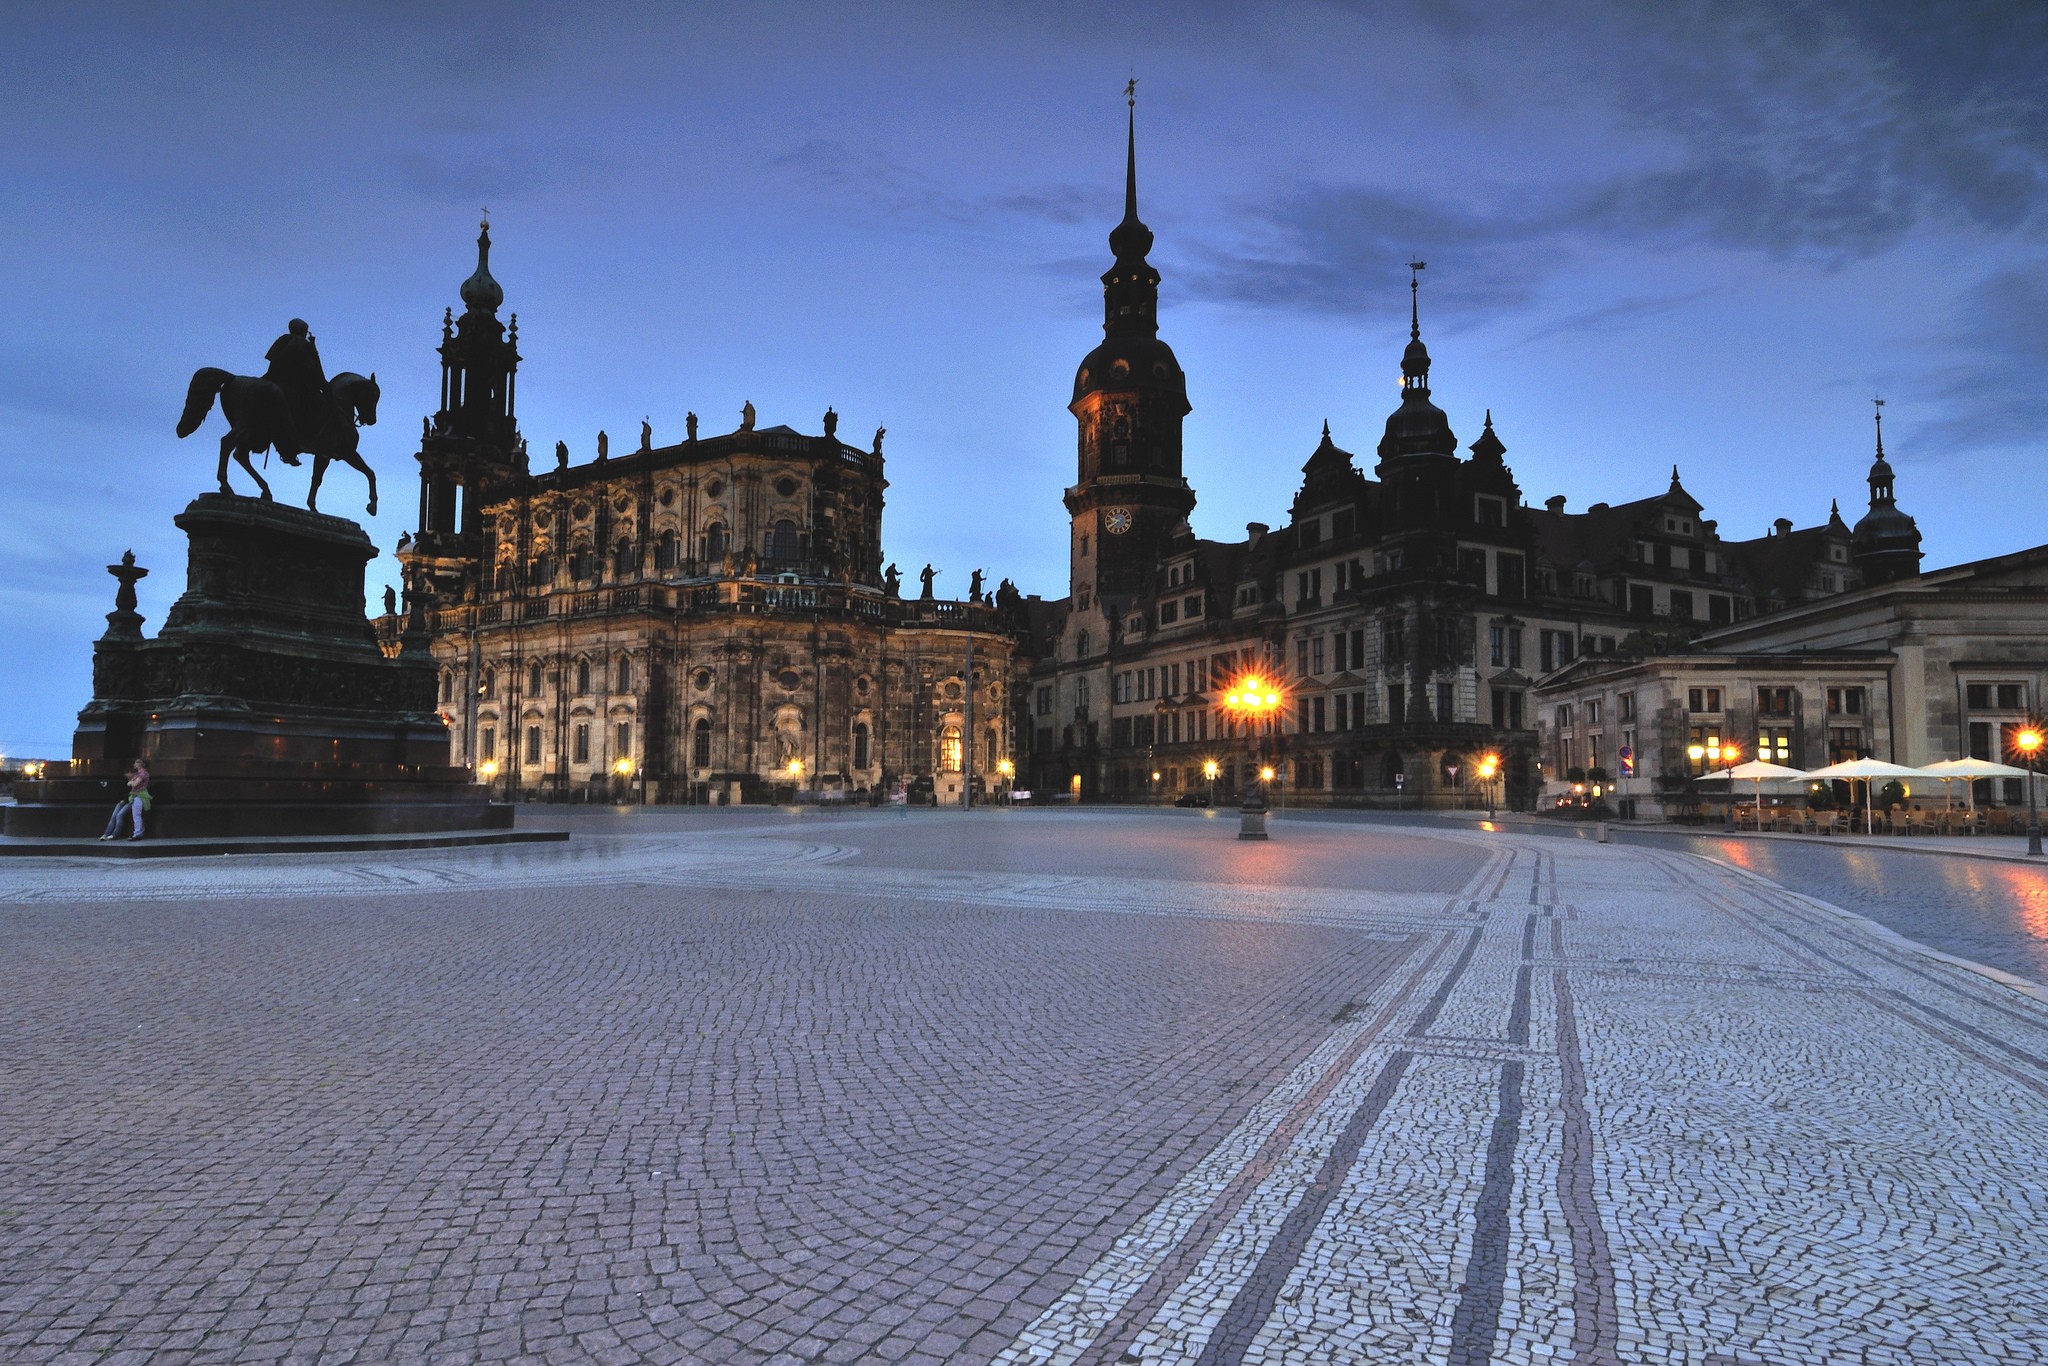 General 2048x1366 Dresden Germany monuments city